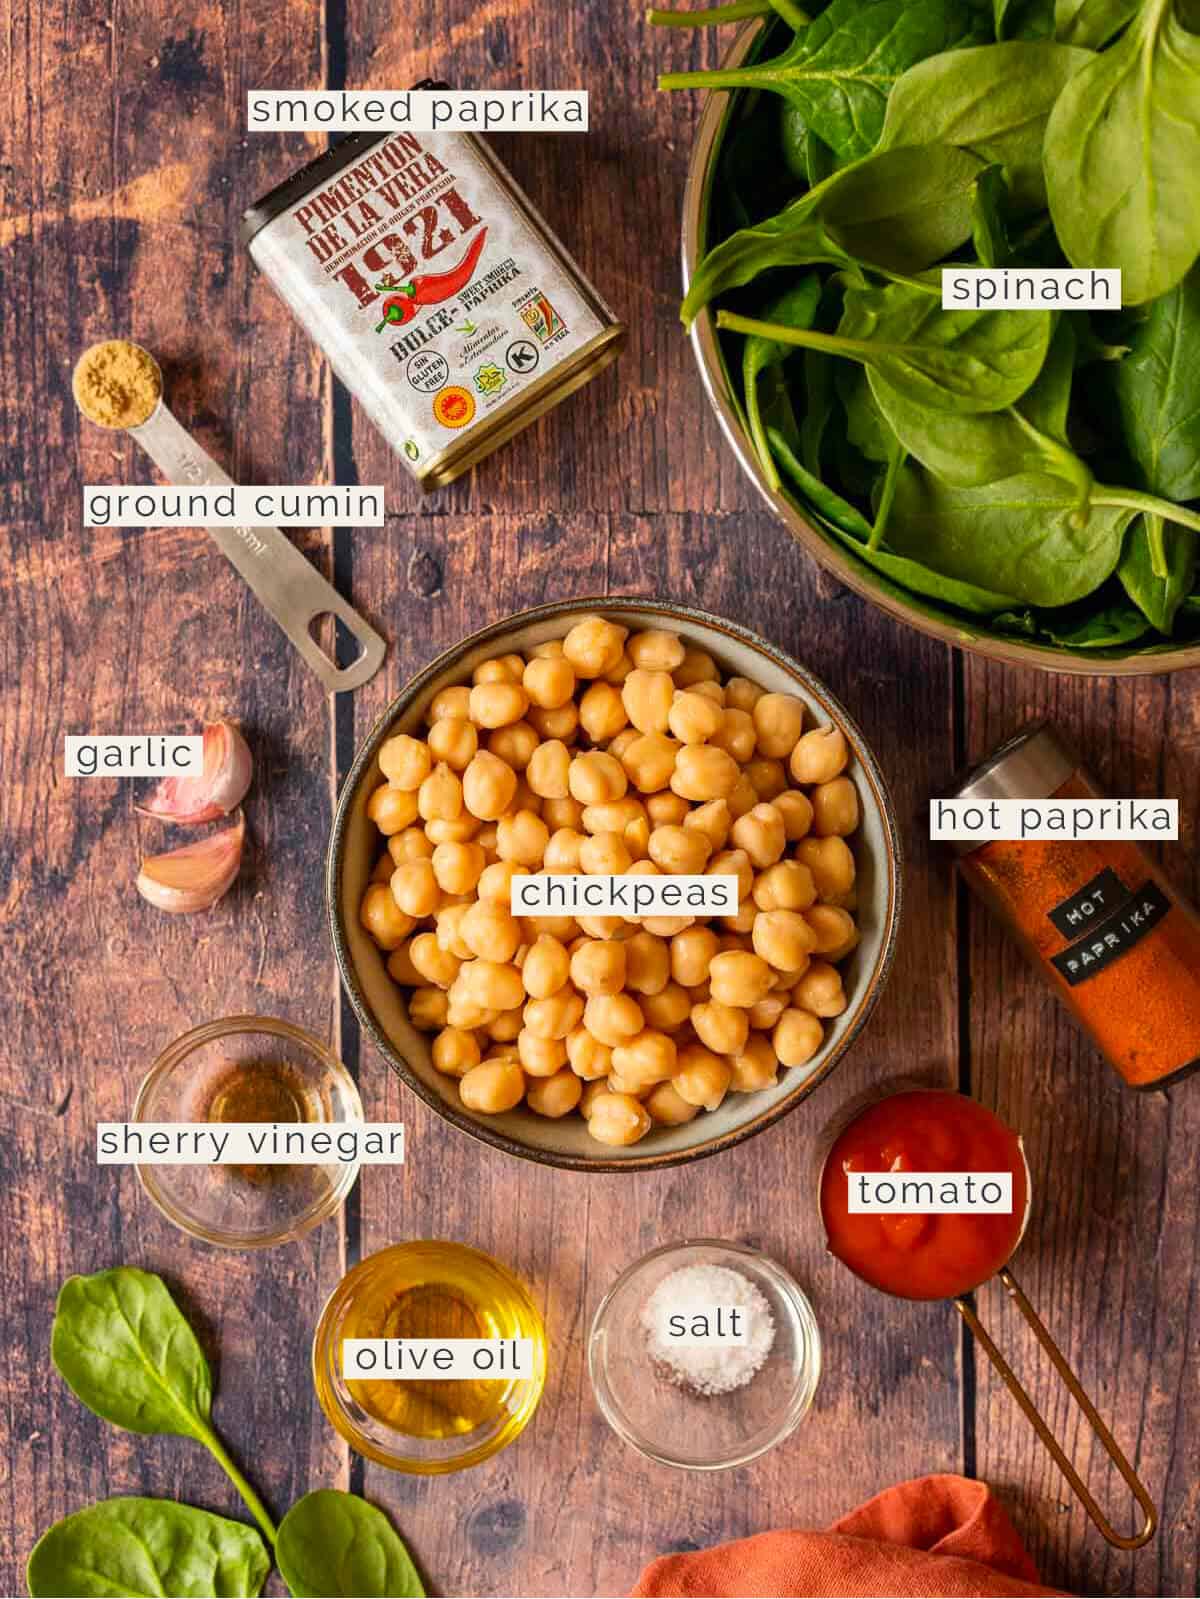 spanish sautéed chickpeas with spinach ingredients.